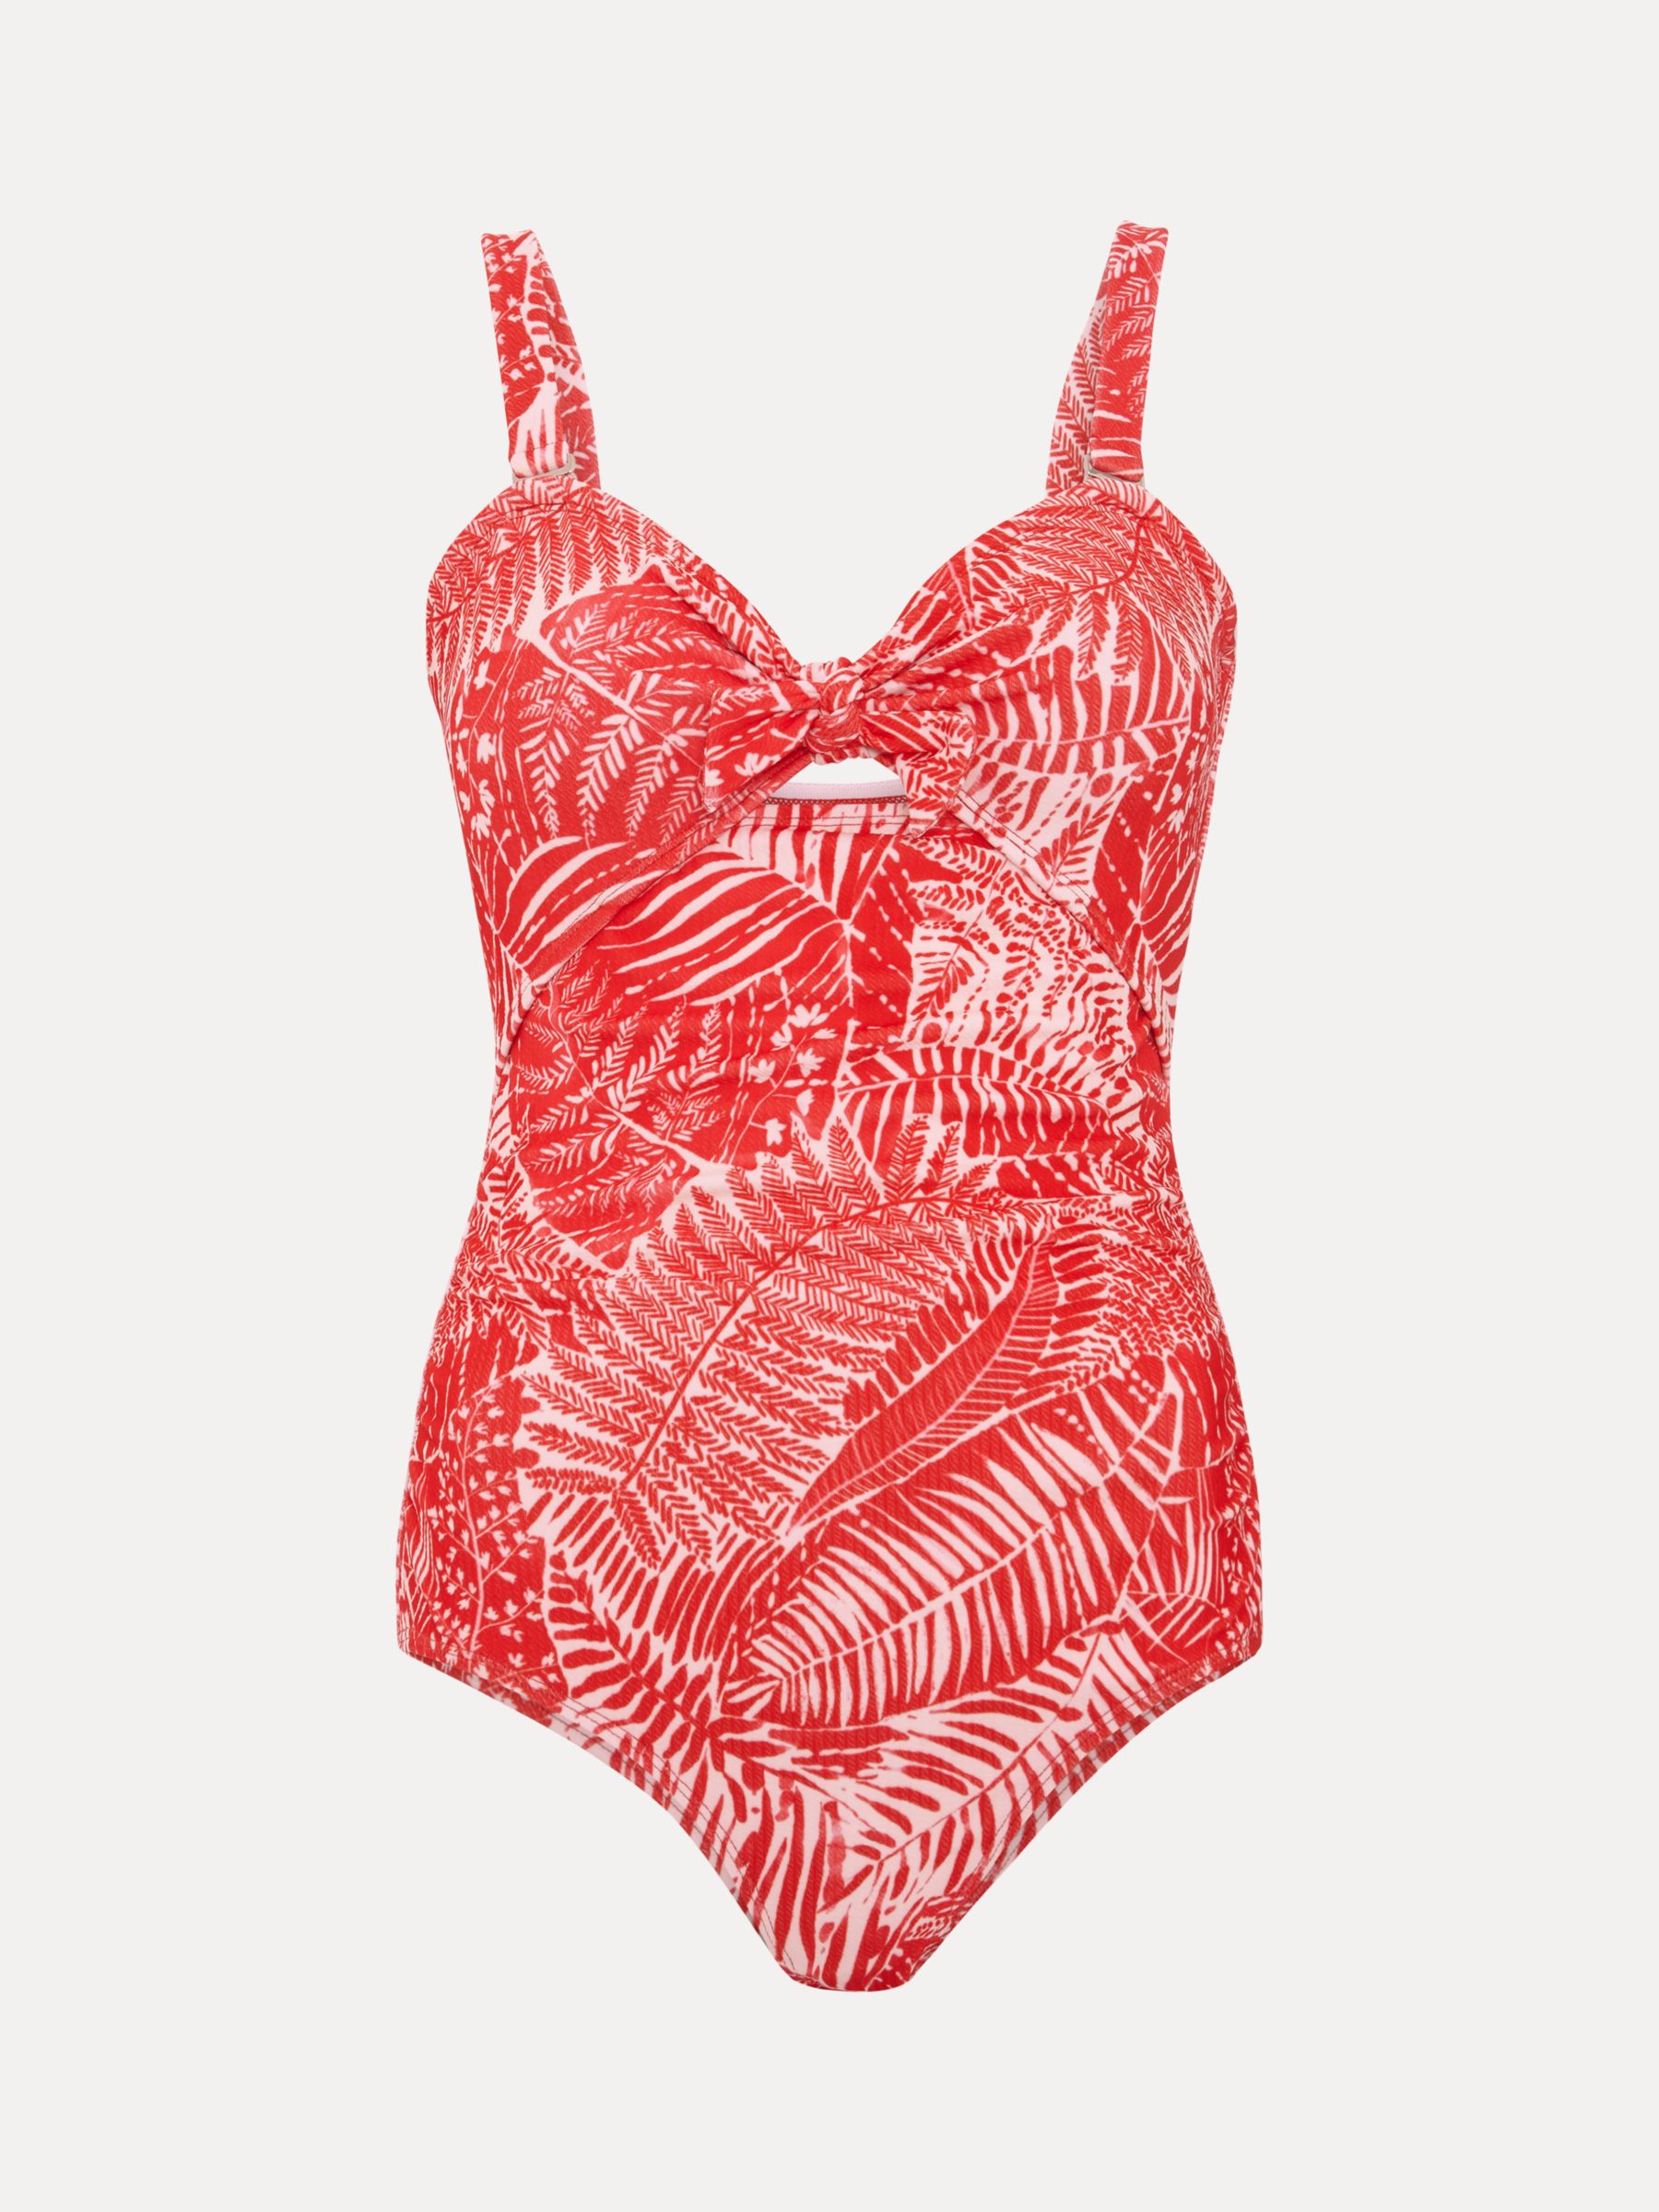 Phase Eight Fern Print Swimsuit, Red/White, 8